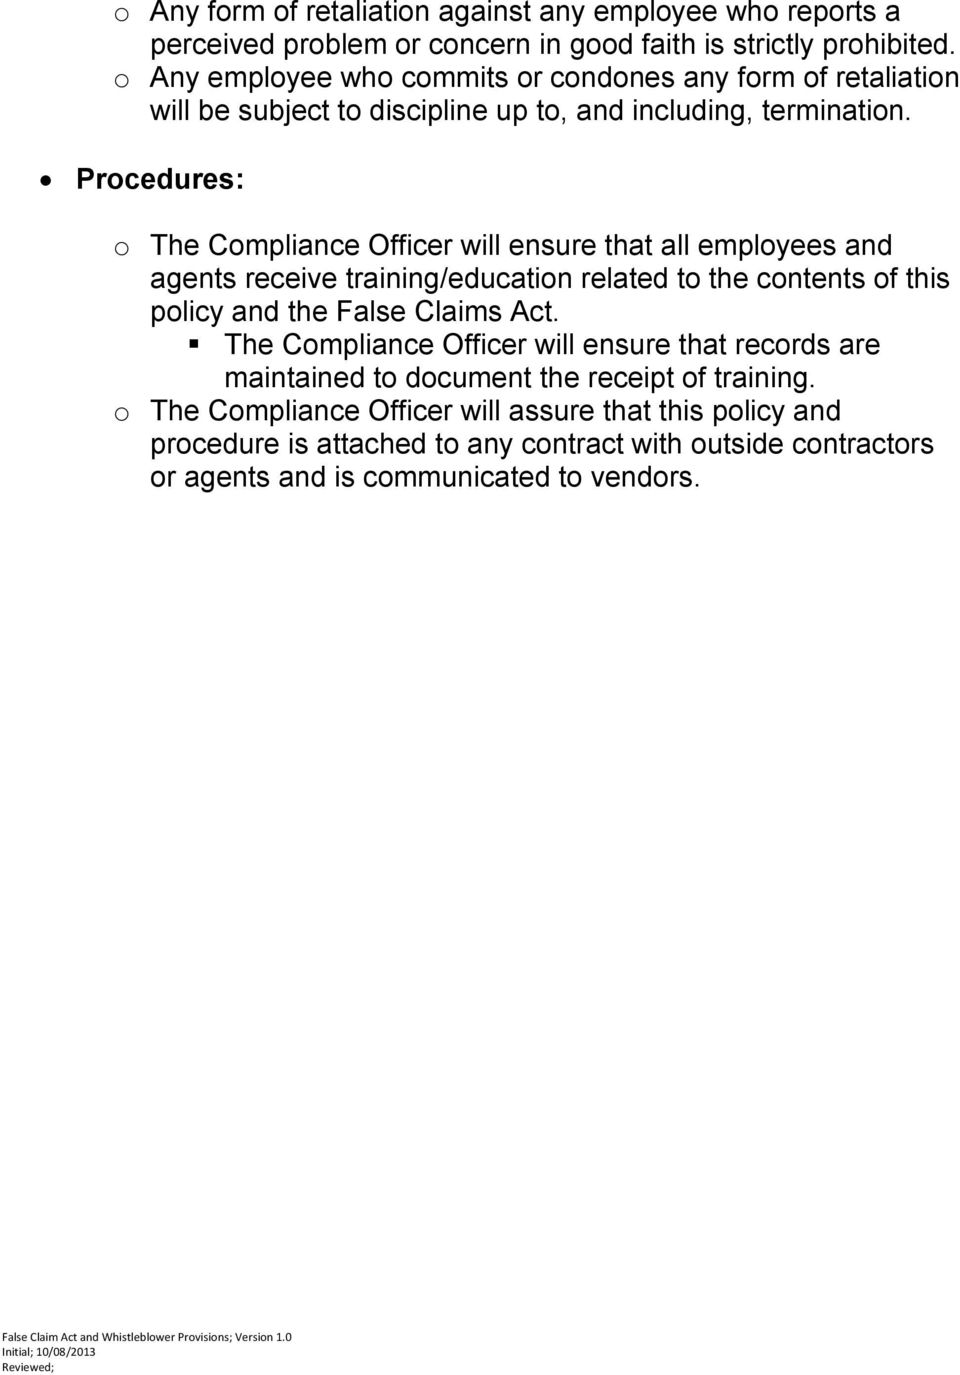 Procedures: o The Compliance Officer will ensure that all employees and agents receive training/education related to the contents of this policy and the False Claims Act.